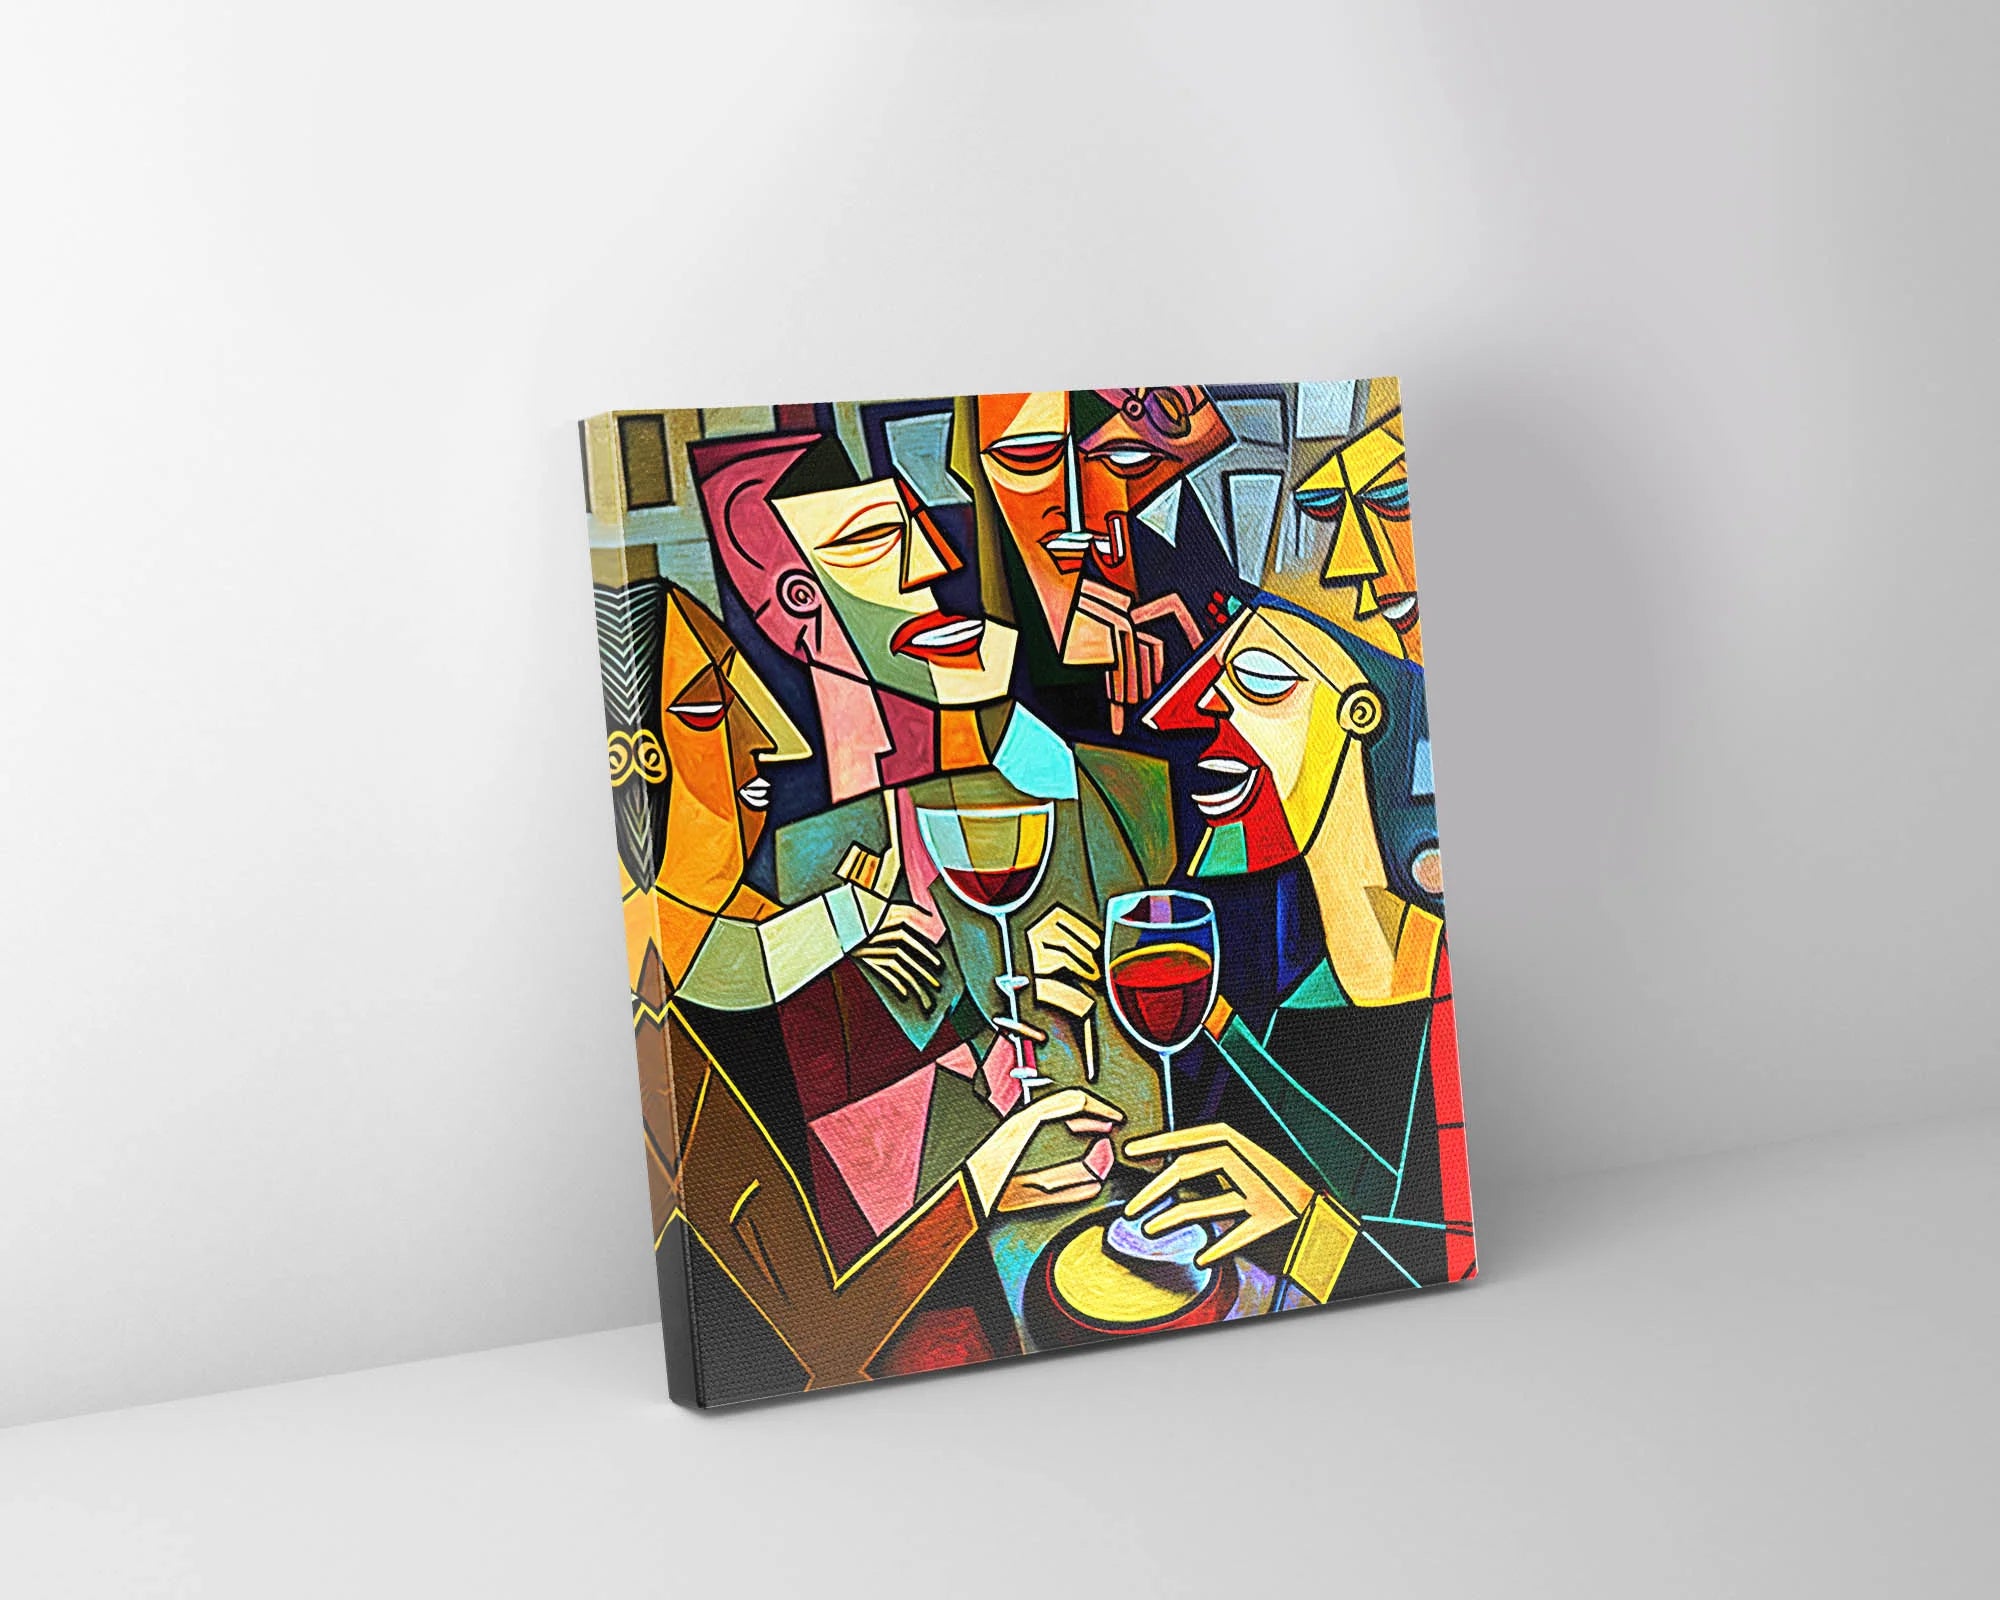 Picasso Drinking Group Canvas Art 40" x 40"